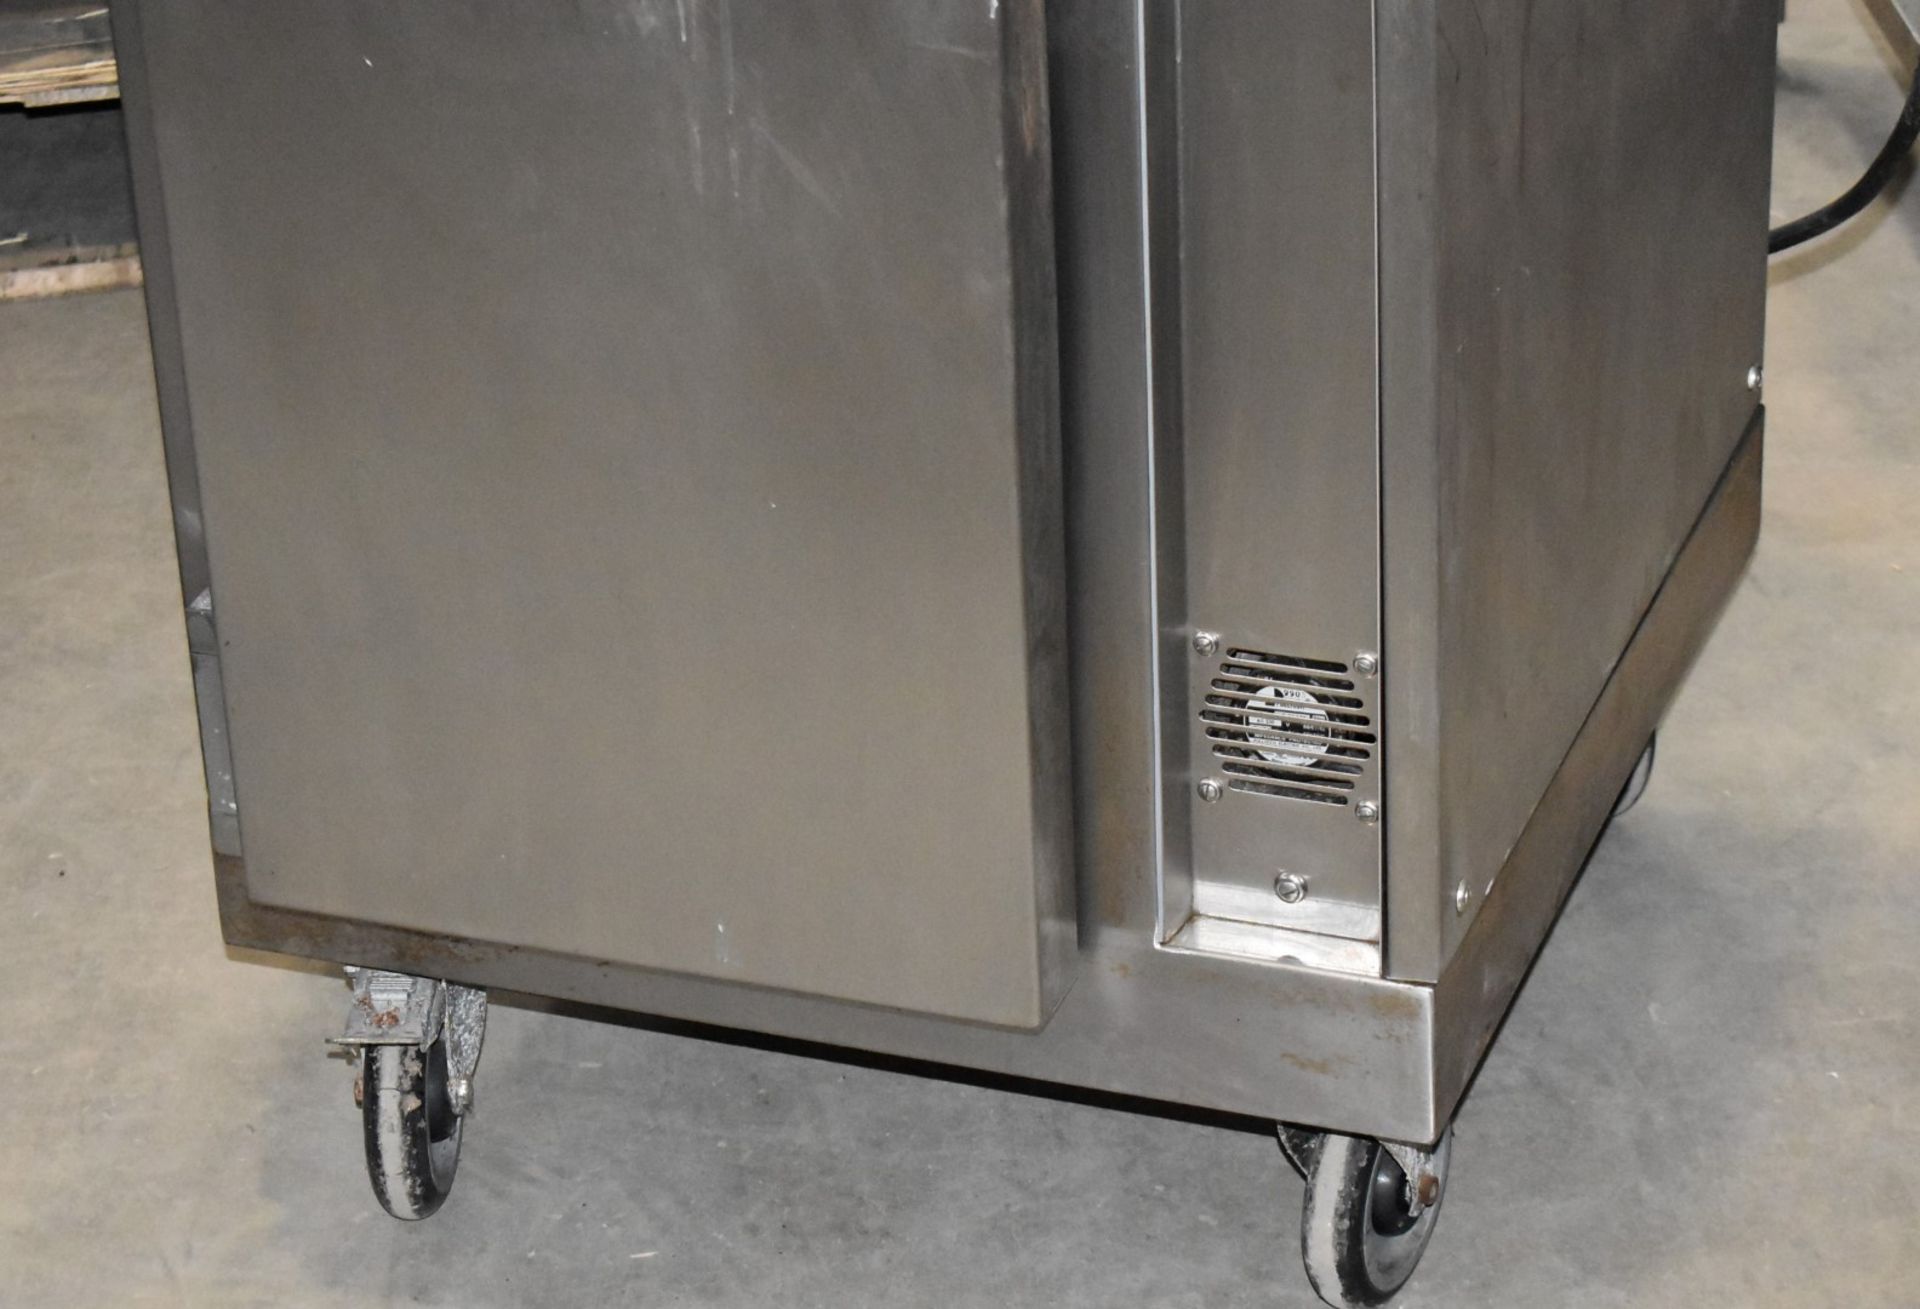 1 x Moffat Recon Upright Pie Warming Cabinet - Stainless Steel Mobile Cabinet - 3 Phase - Image 5 of 14